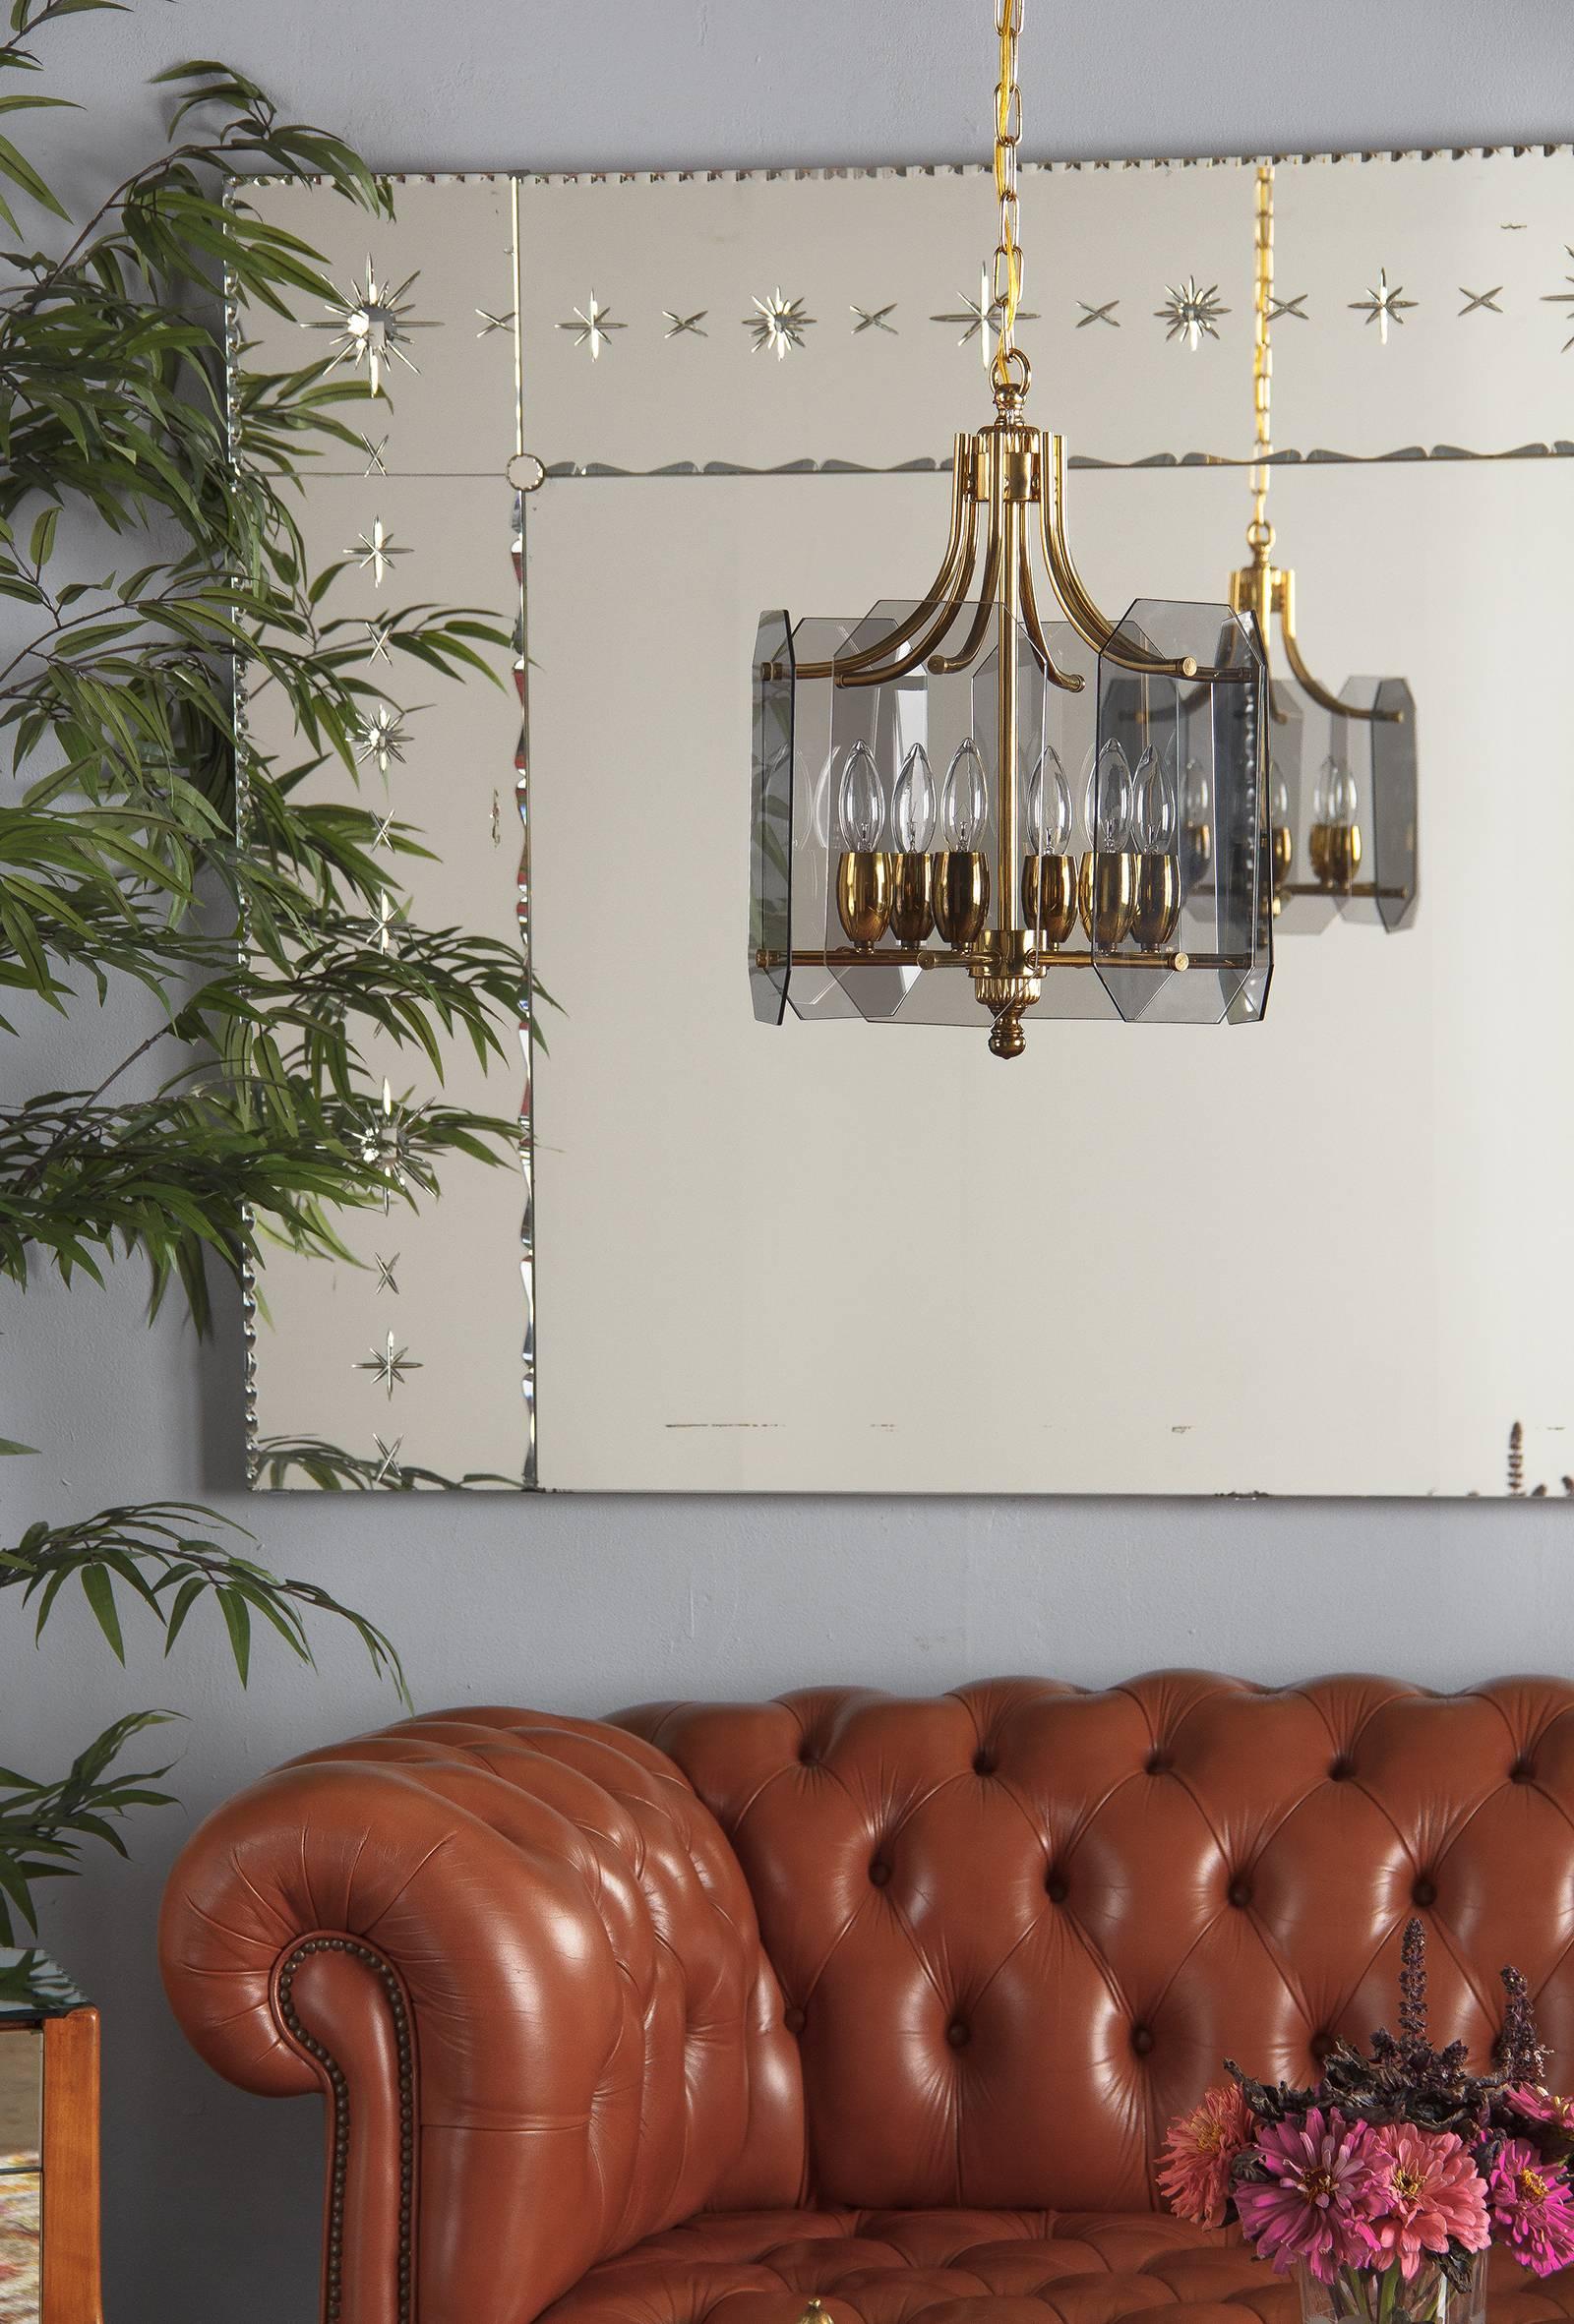 Midcentury vintage brass and smoked glass panel chandelier, French, circa 1960. Six rectangular glass panels with notched edges encircle the chandelier, attached to the structure by two levels of tubular brass shafts. A central shaft connects to six